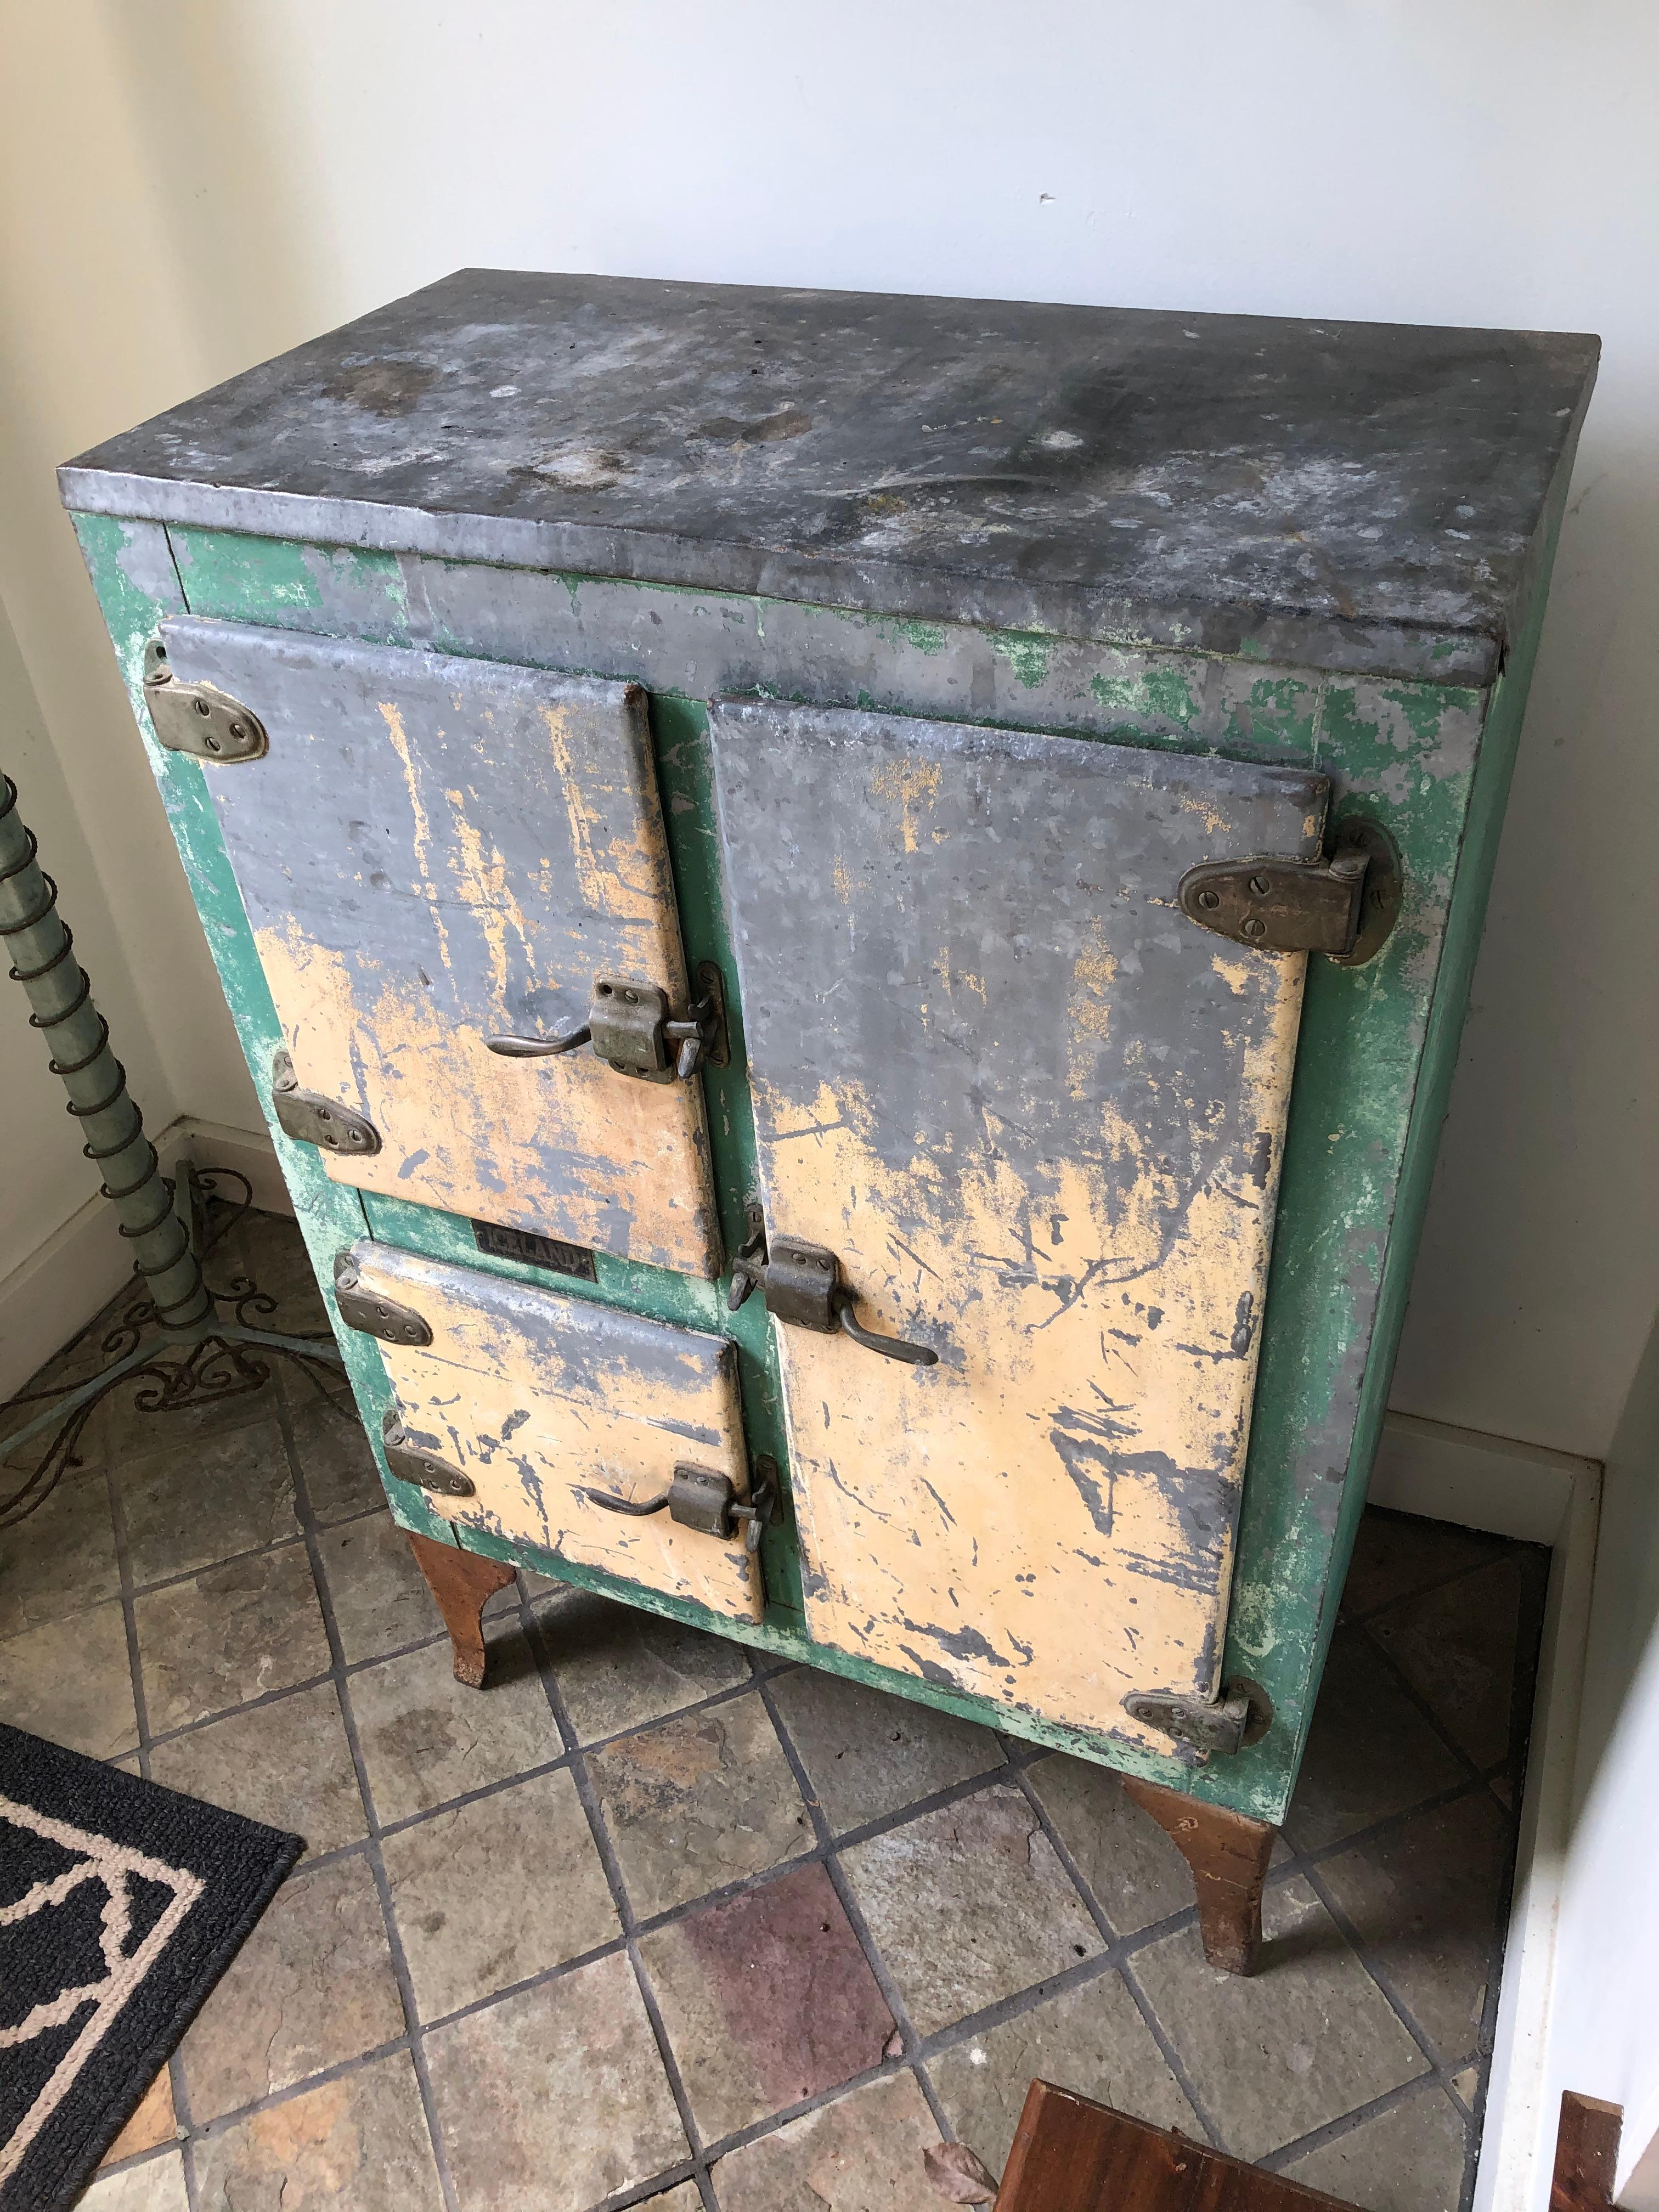 Wonderful vintage metal icebox with fabulous distressed green and cream paint with original silver showing through. Interior offers functional storage space, most recently used in an artist's studio.